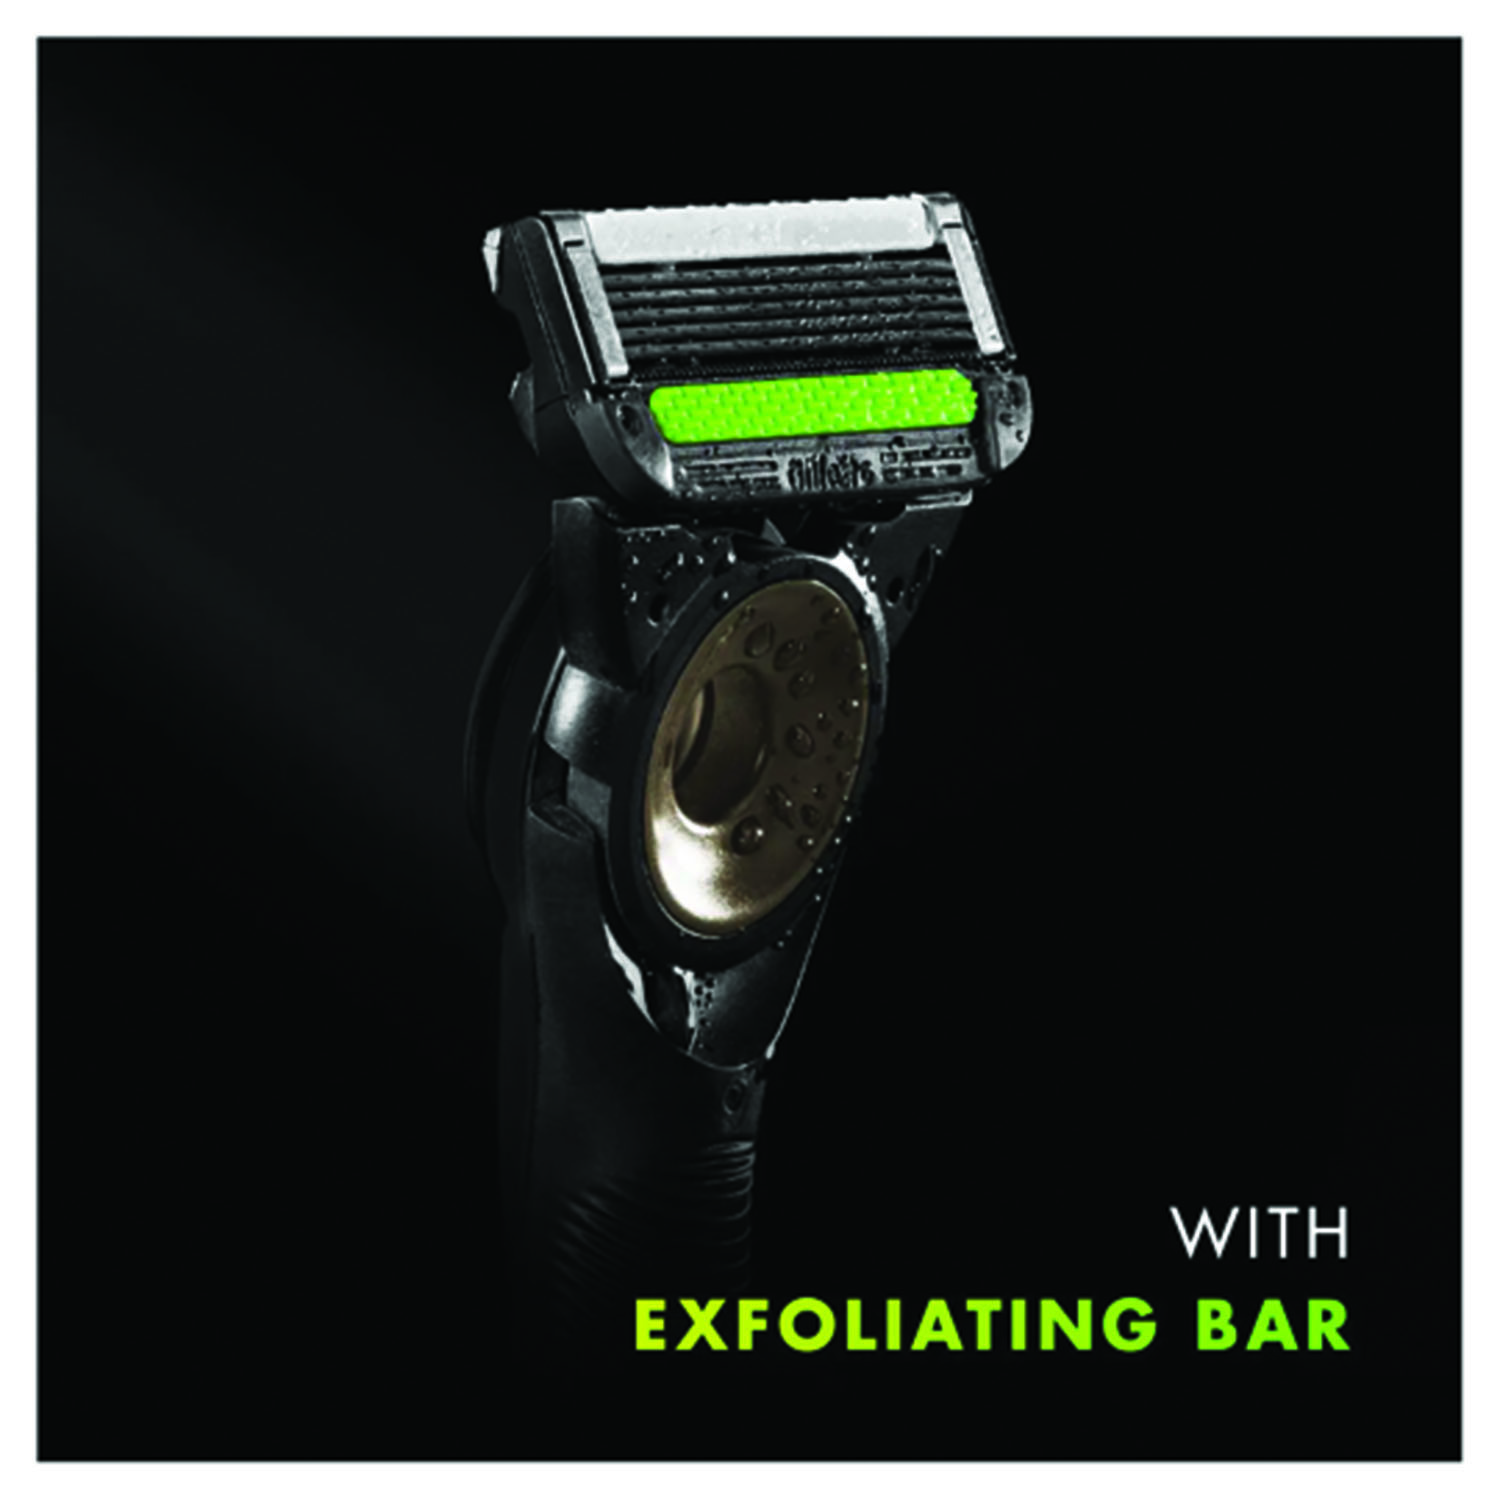 A built-in exfoliating bar to remove dirt and debris